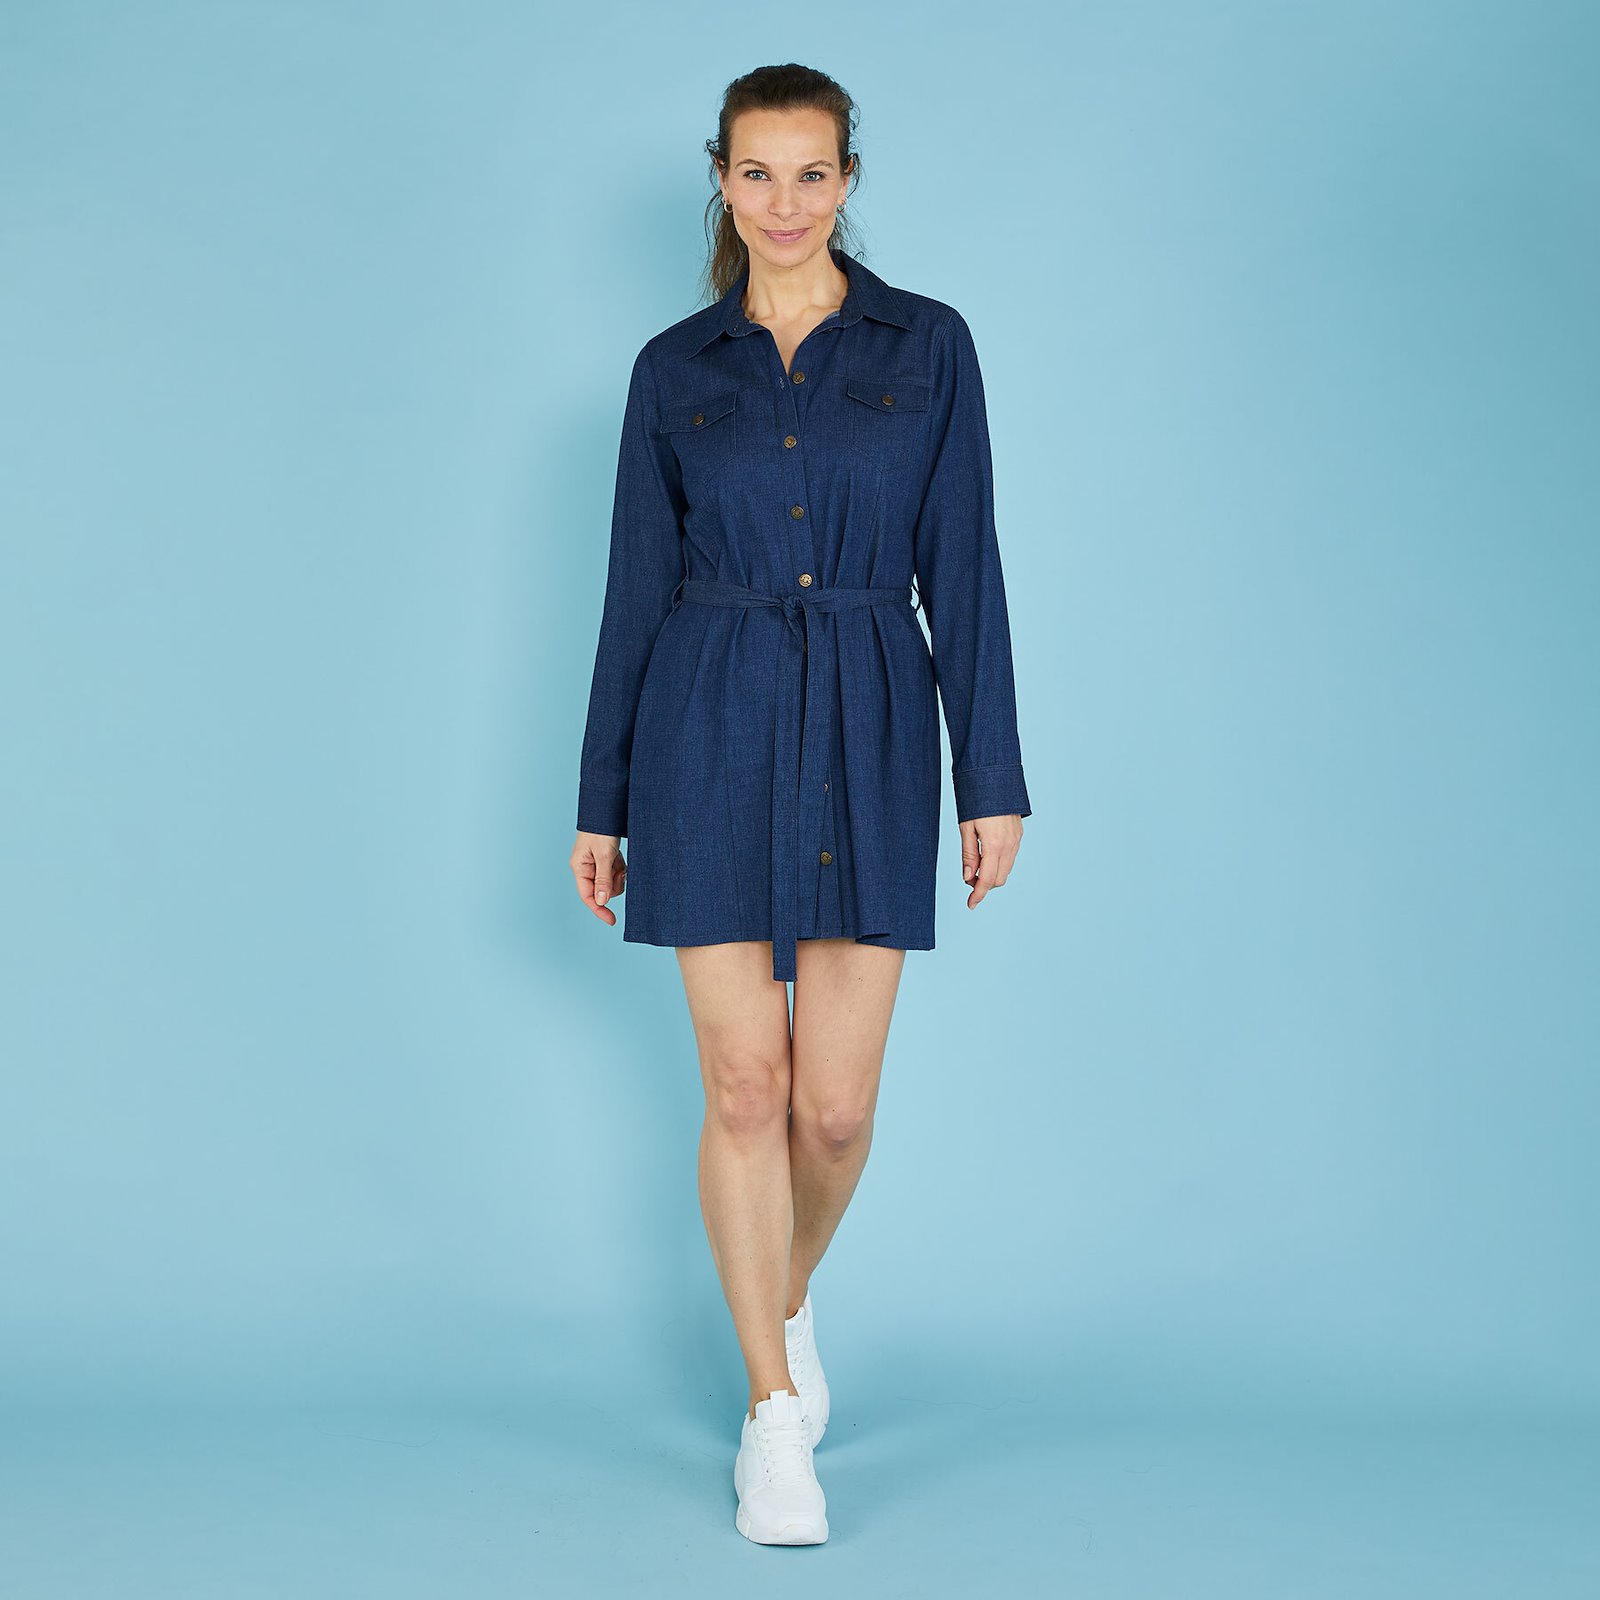 Fitted shirt dress with tie belt, 38/10 p23176000_p23176001_p23176002_p23176003_p23176004_pack_d